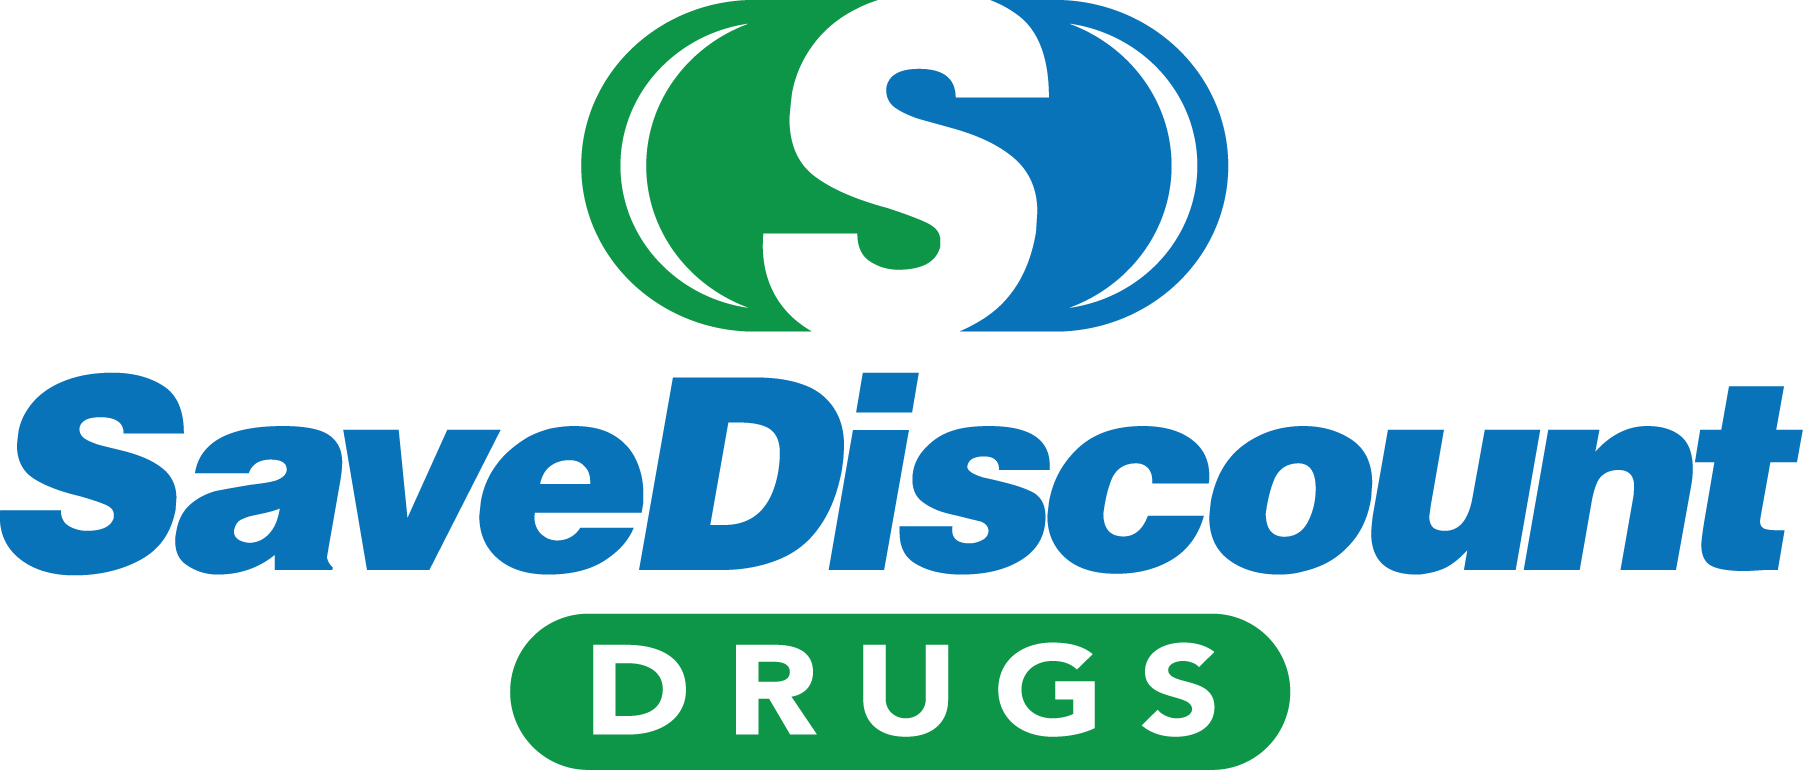 Save Discount Drugs